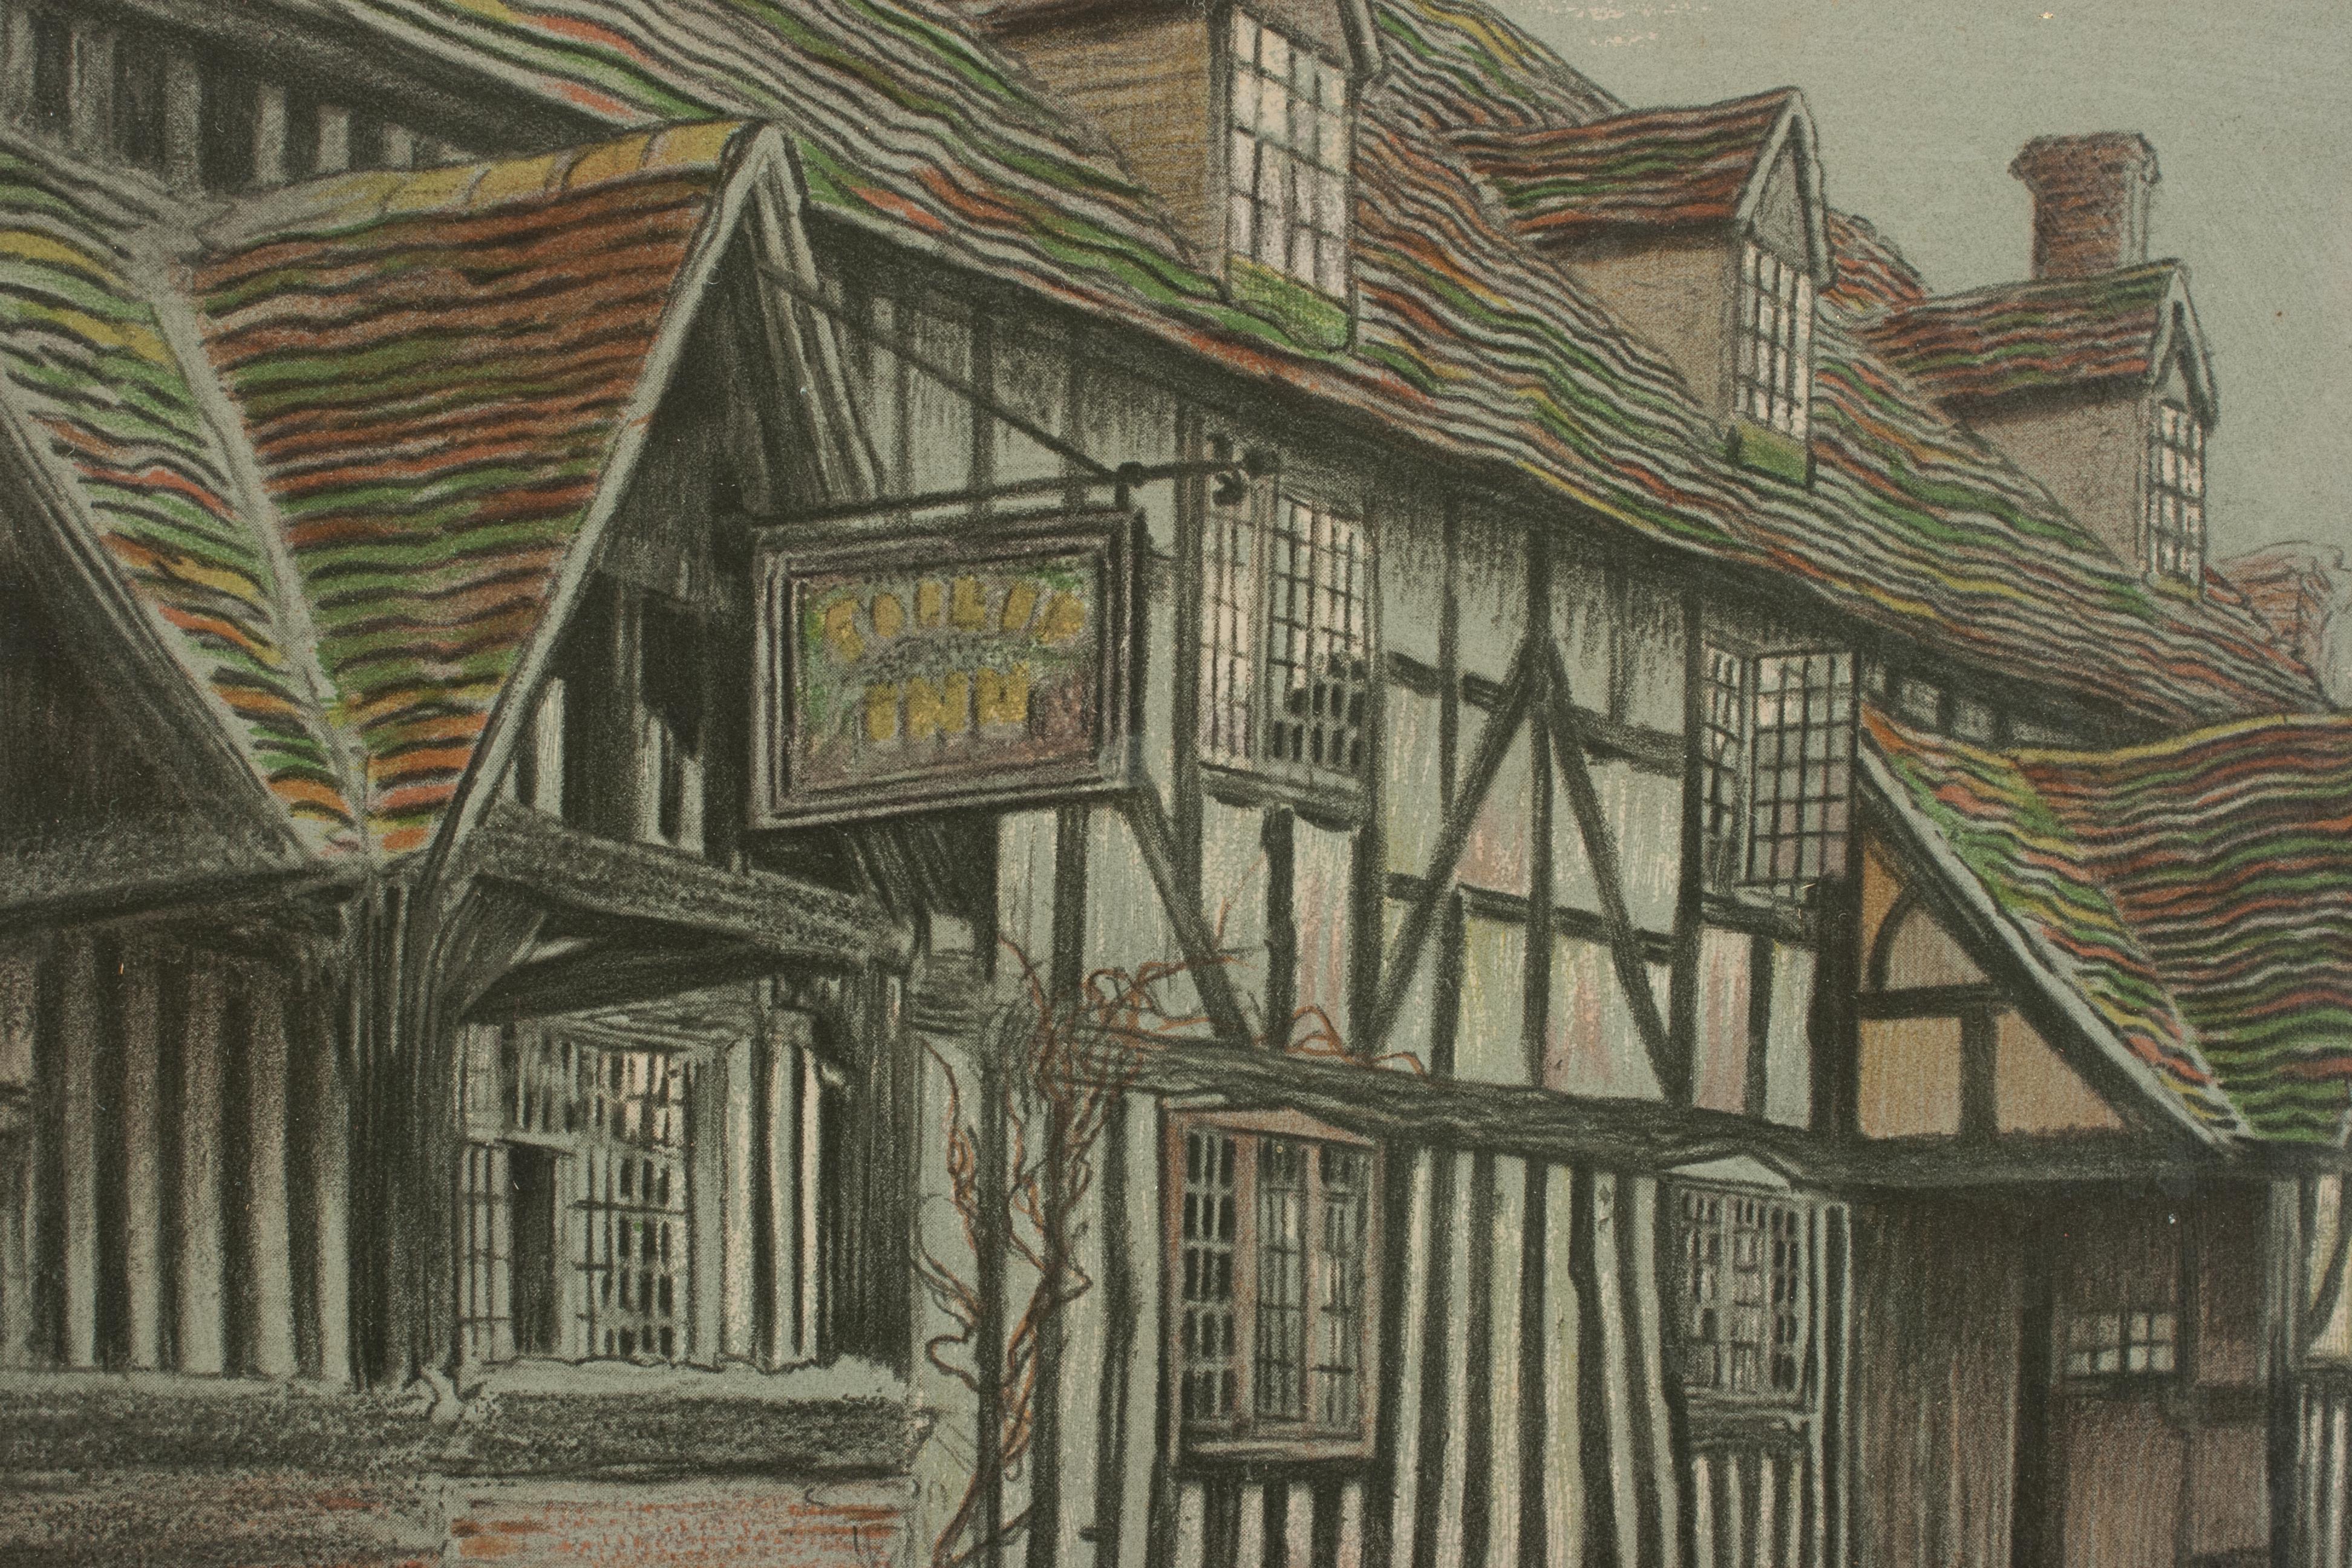 Early 20th Century Old English Inns by Cecil Aldin, the Talbot Inn, Signed in Pencil, circa 1921